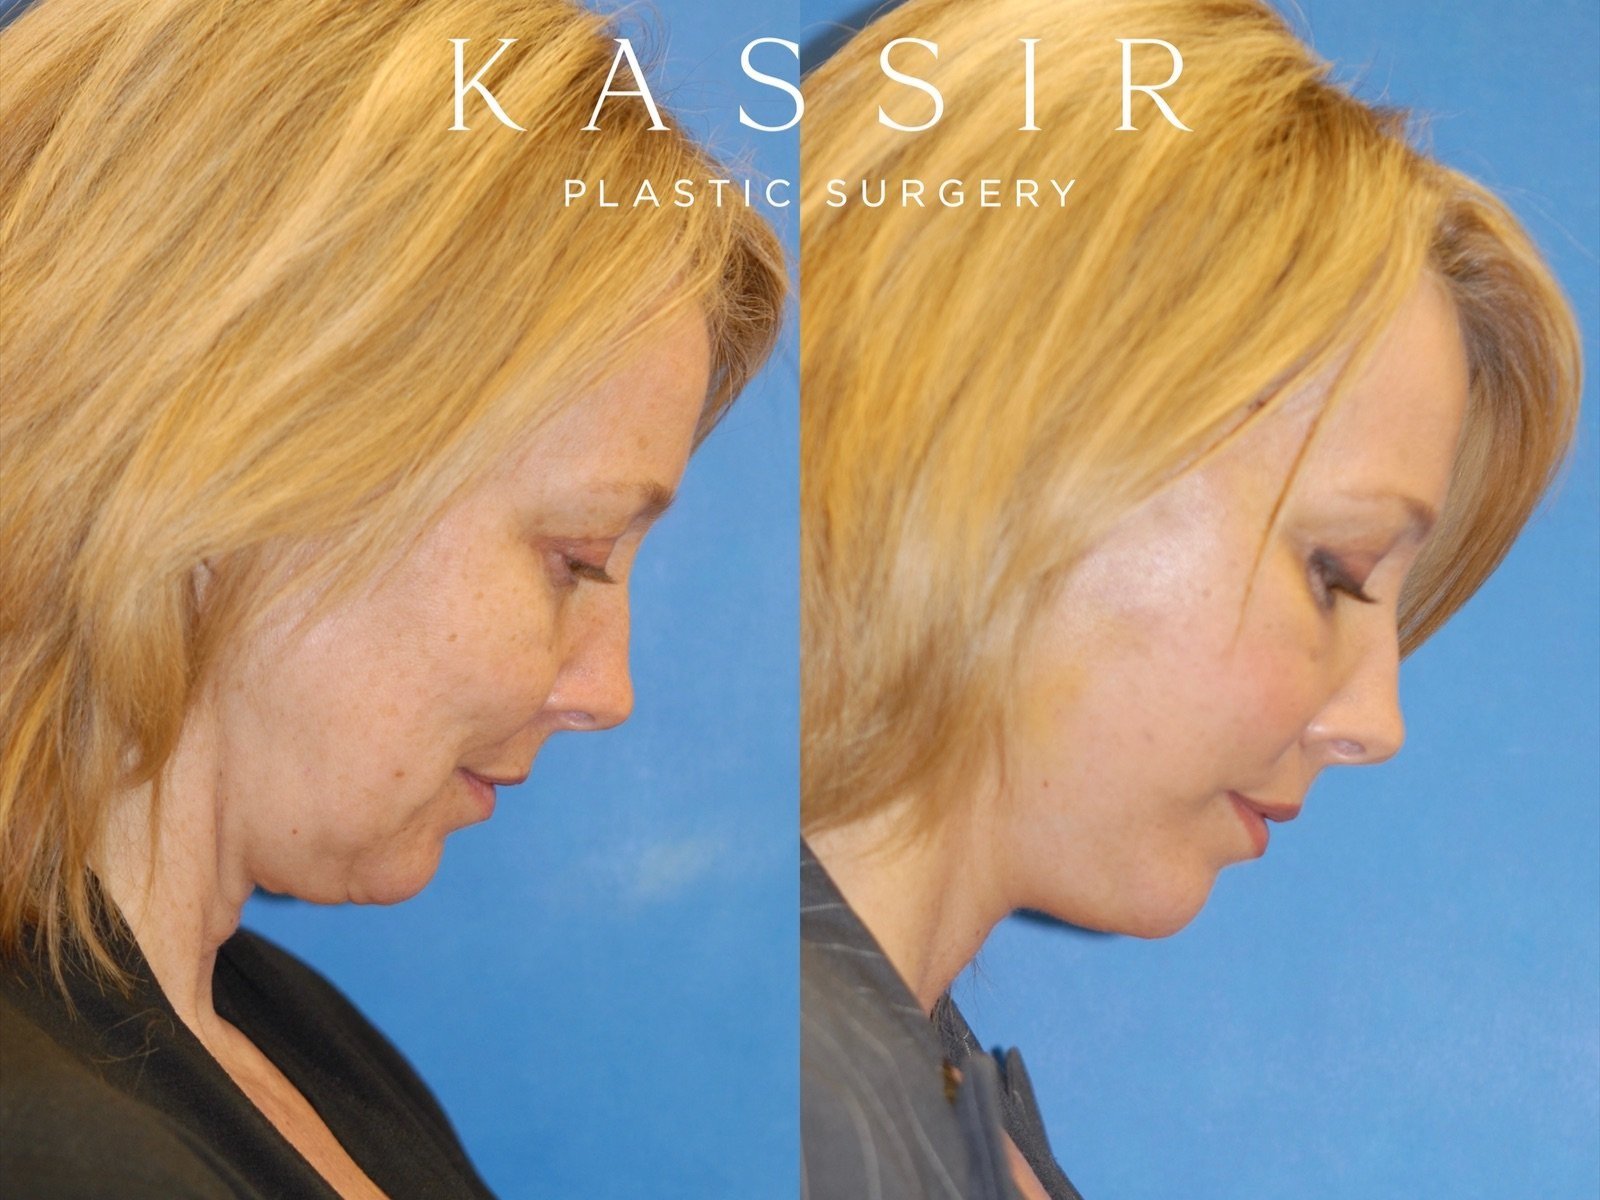 facelift+side+view+right+side+down+12-22-2022.jpg